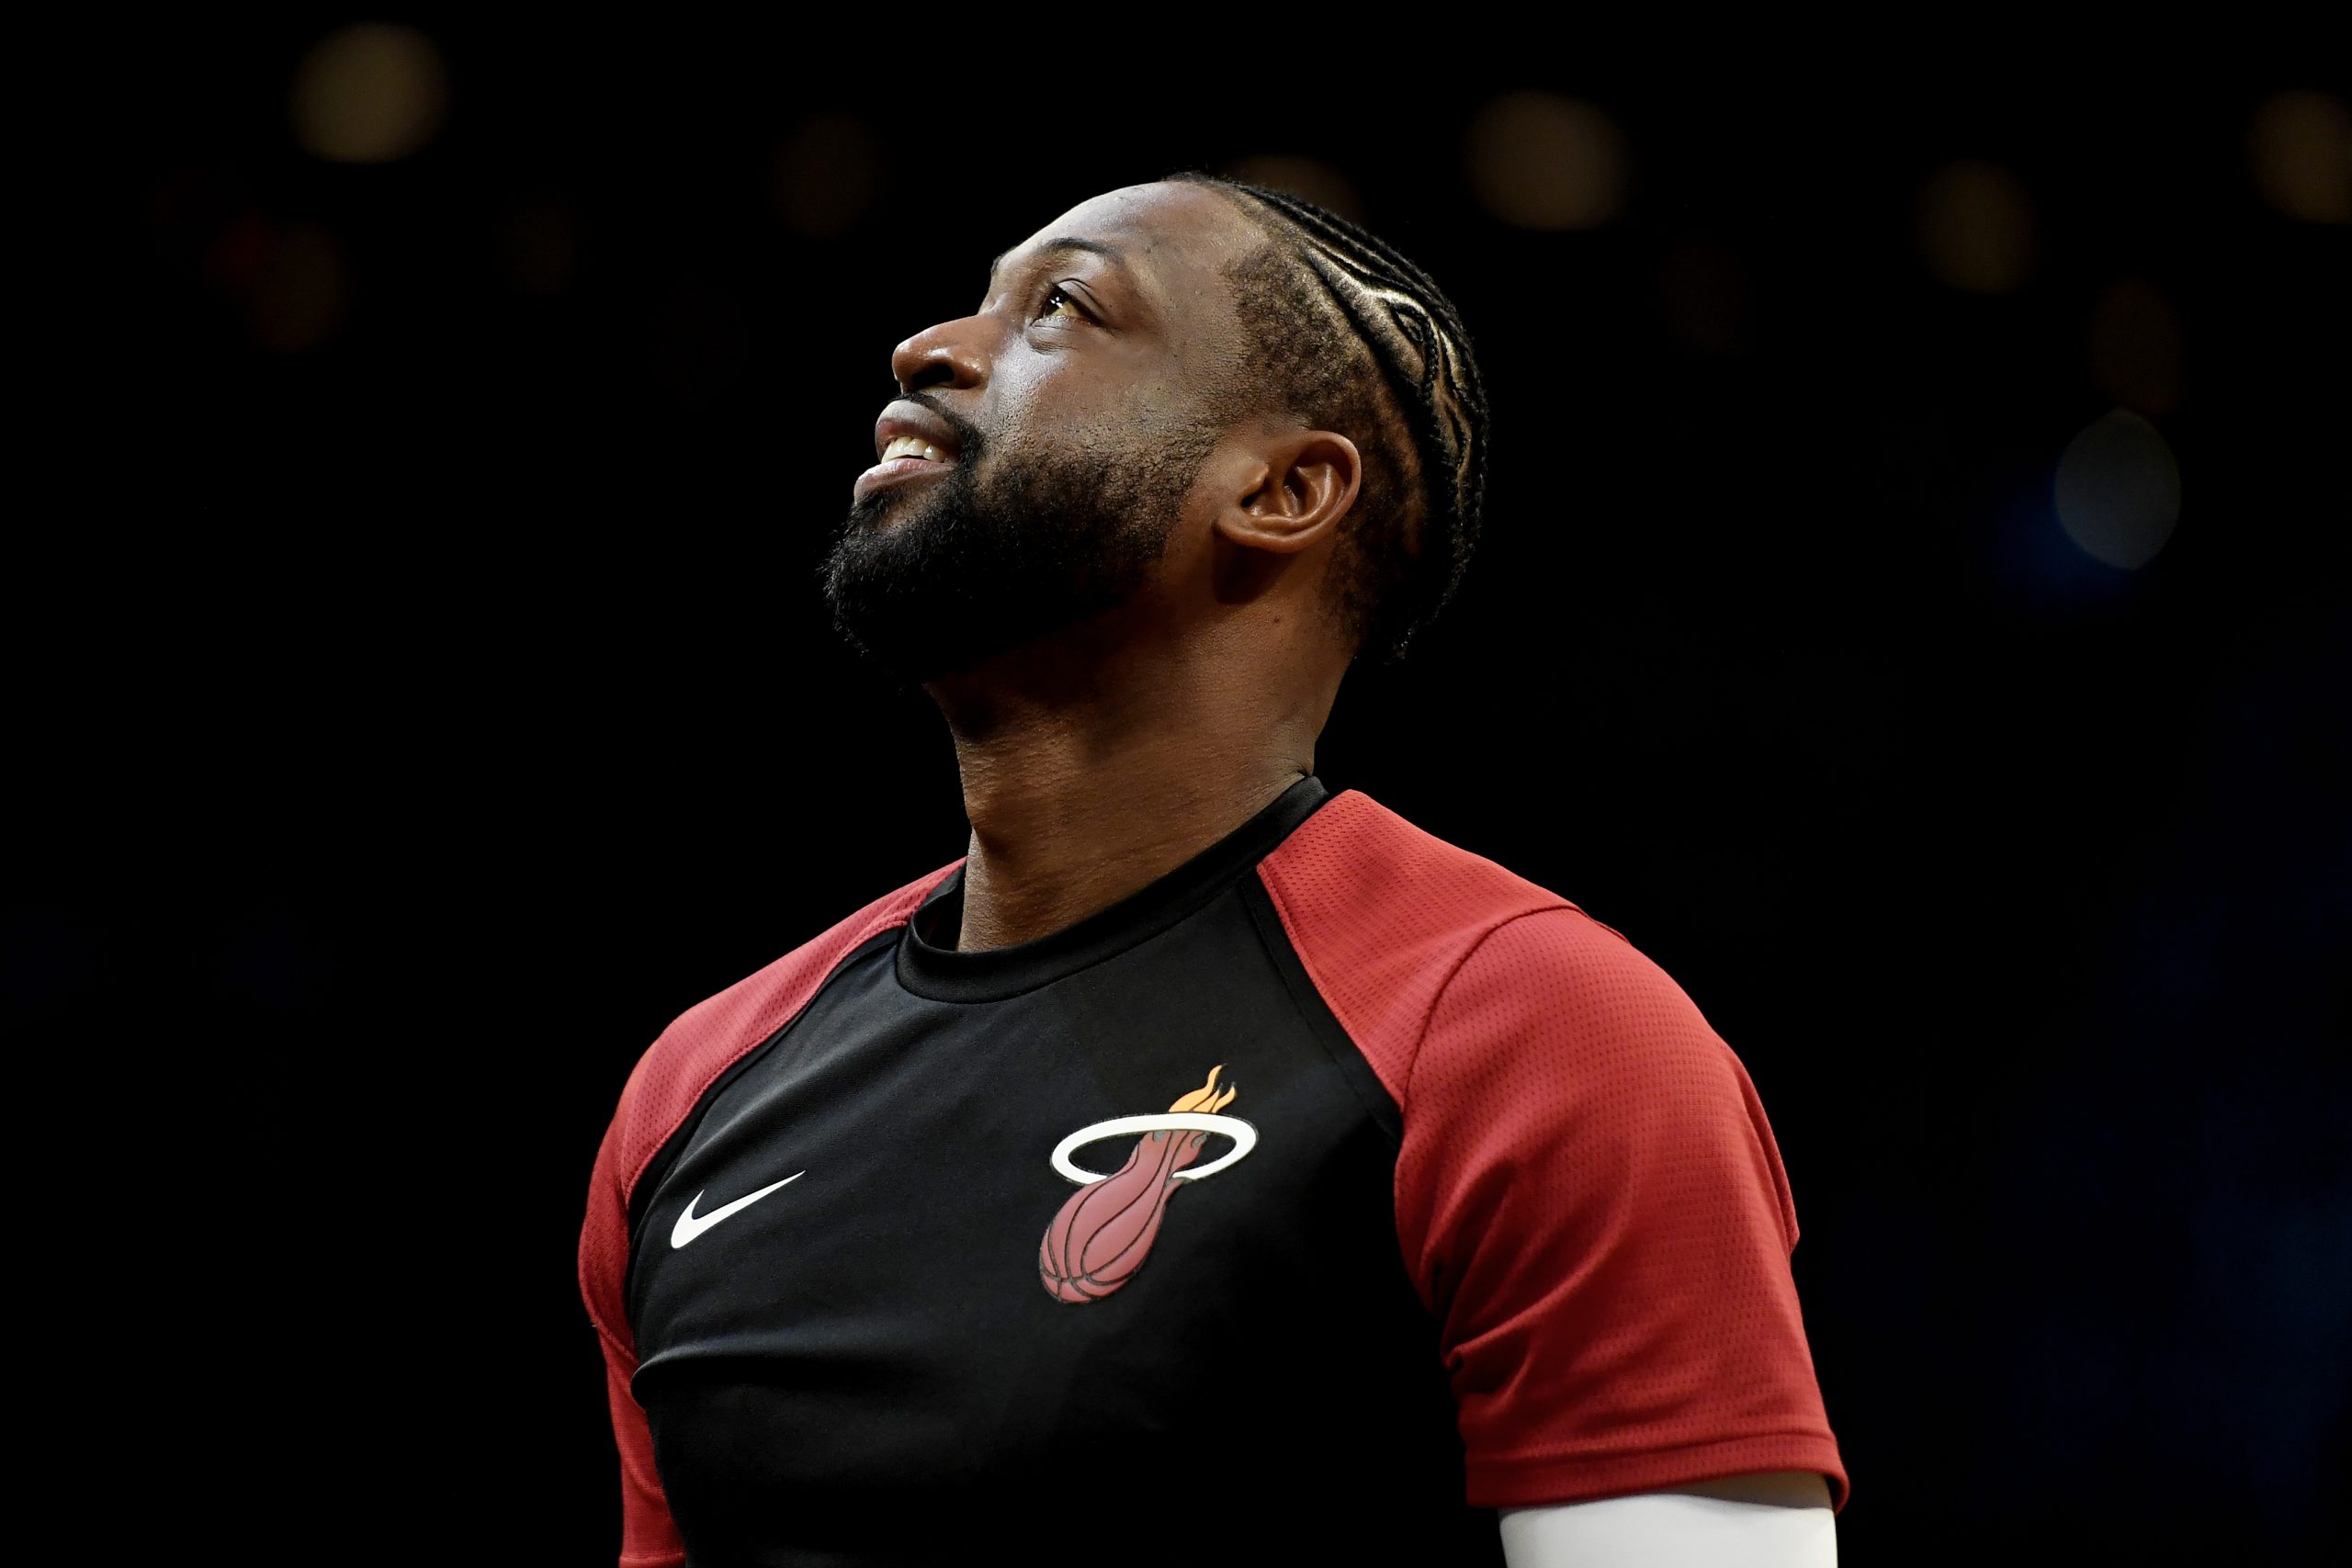 Dwyane Wade gets emotional at Cannes Lions about NBA ritual